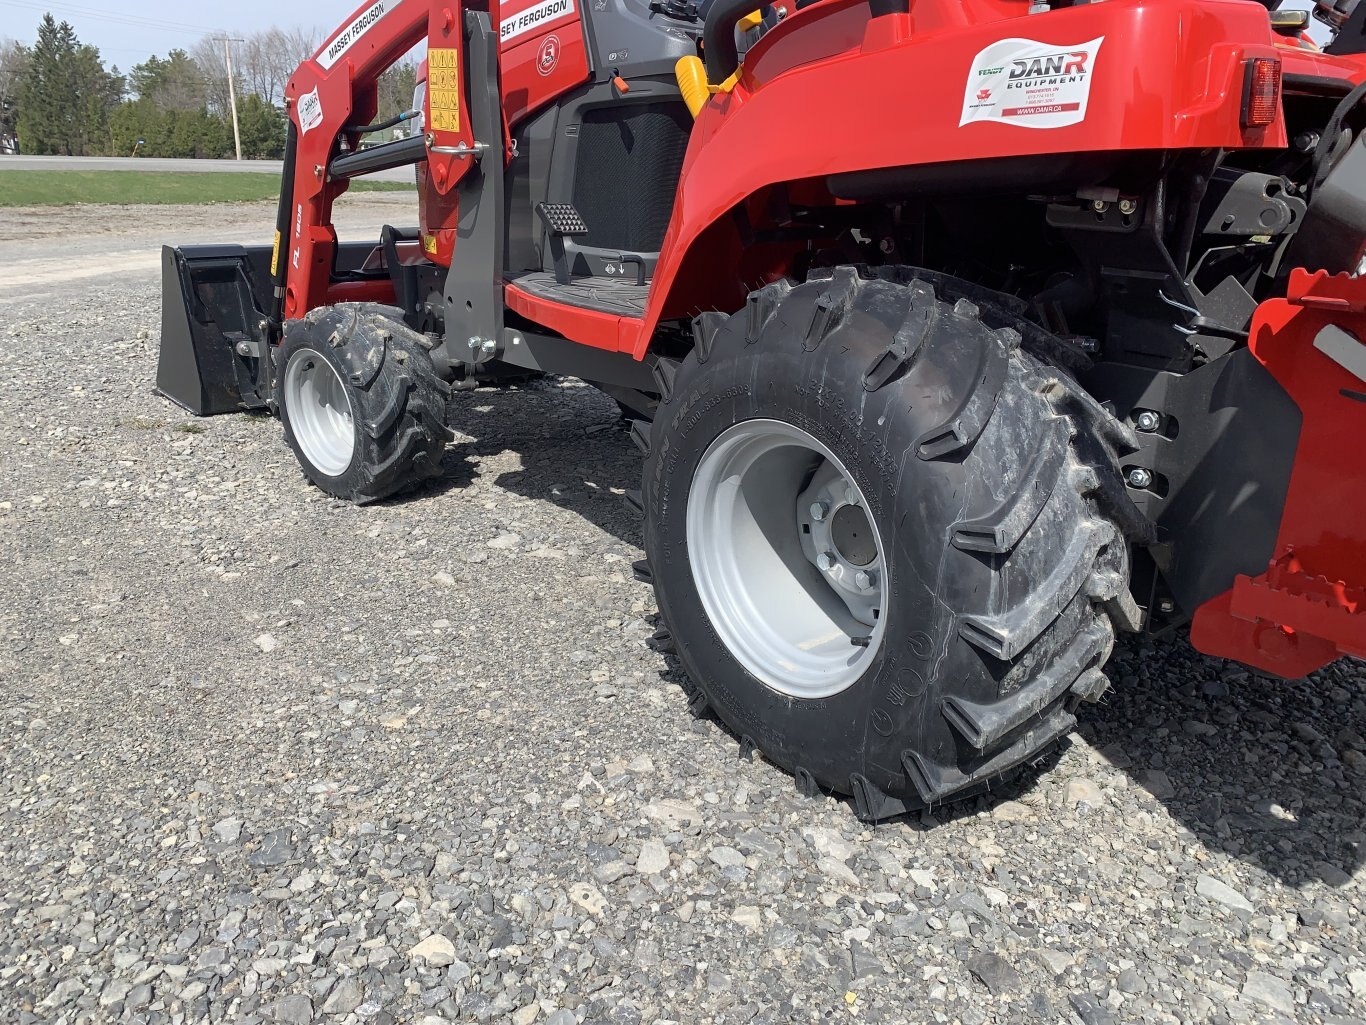 Massey Ferguson GC1725M Premium Sub Compact with Loader on Ag Tires